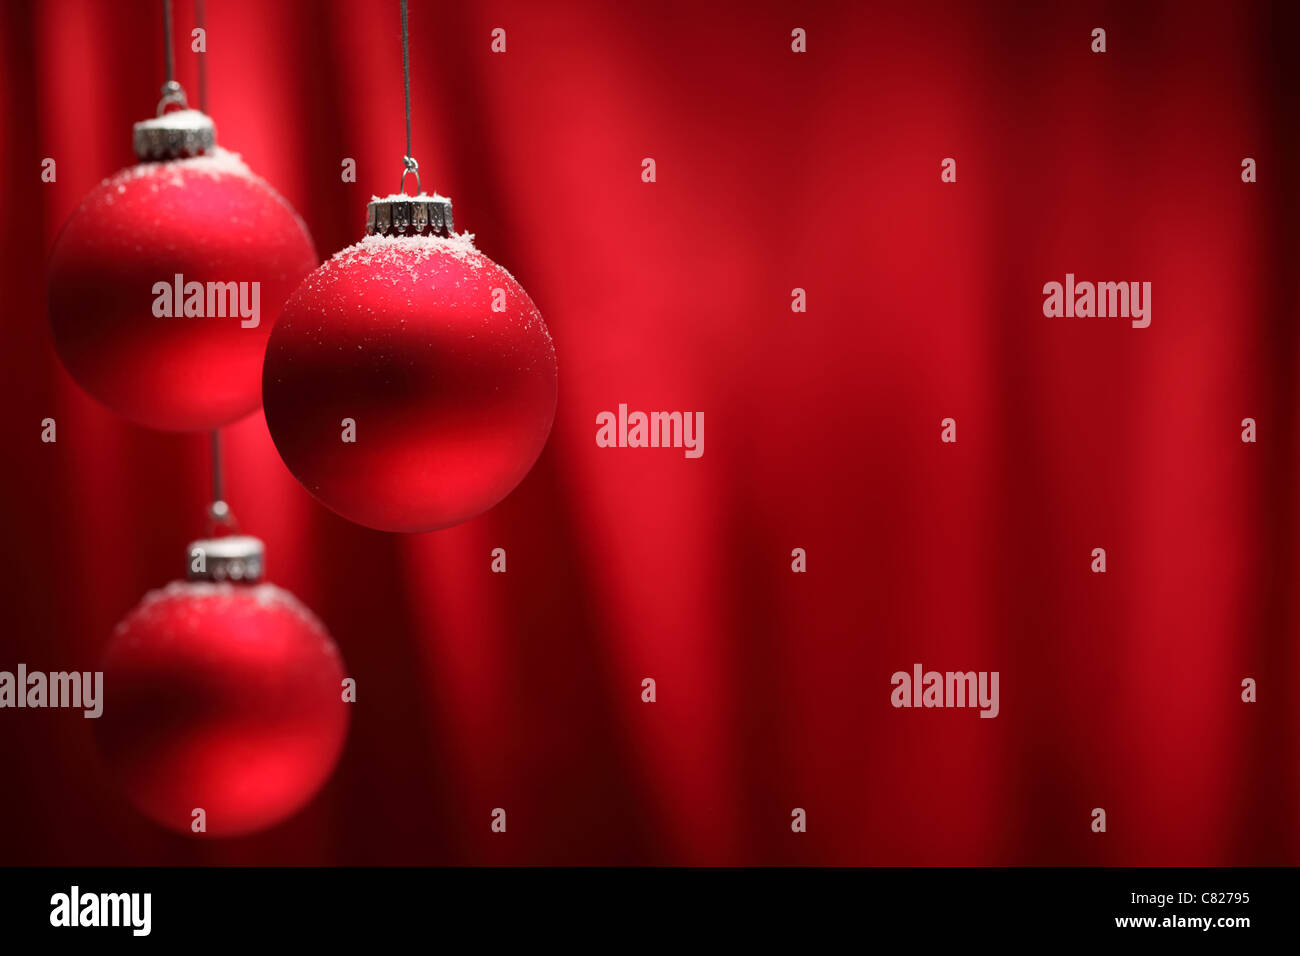 Red Christmas balls hanging over red background. Stock Photo